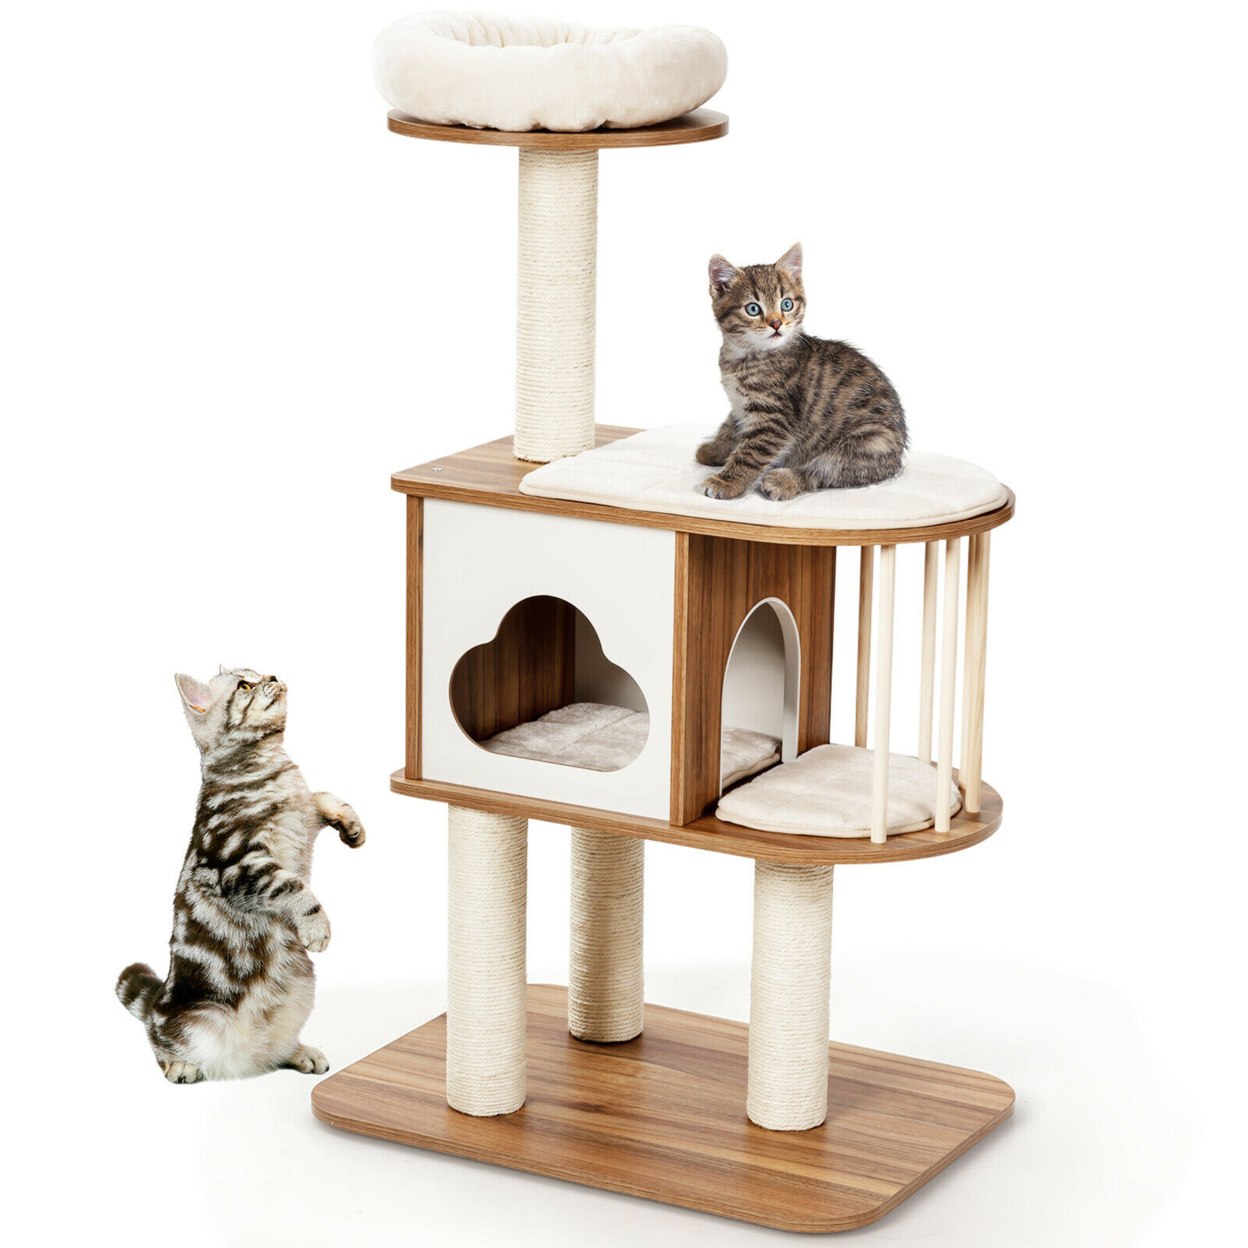 46'' Modern Wooden Cat Tree With Platform & Washable Cushions For Kittens & Cats